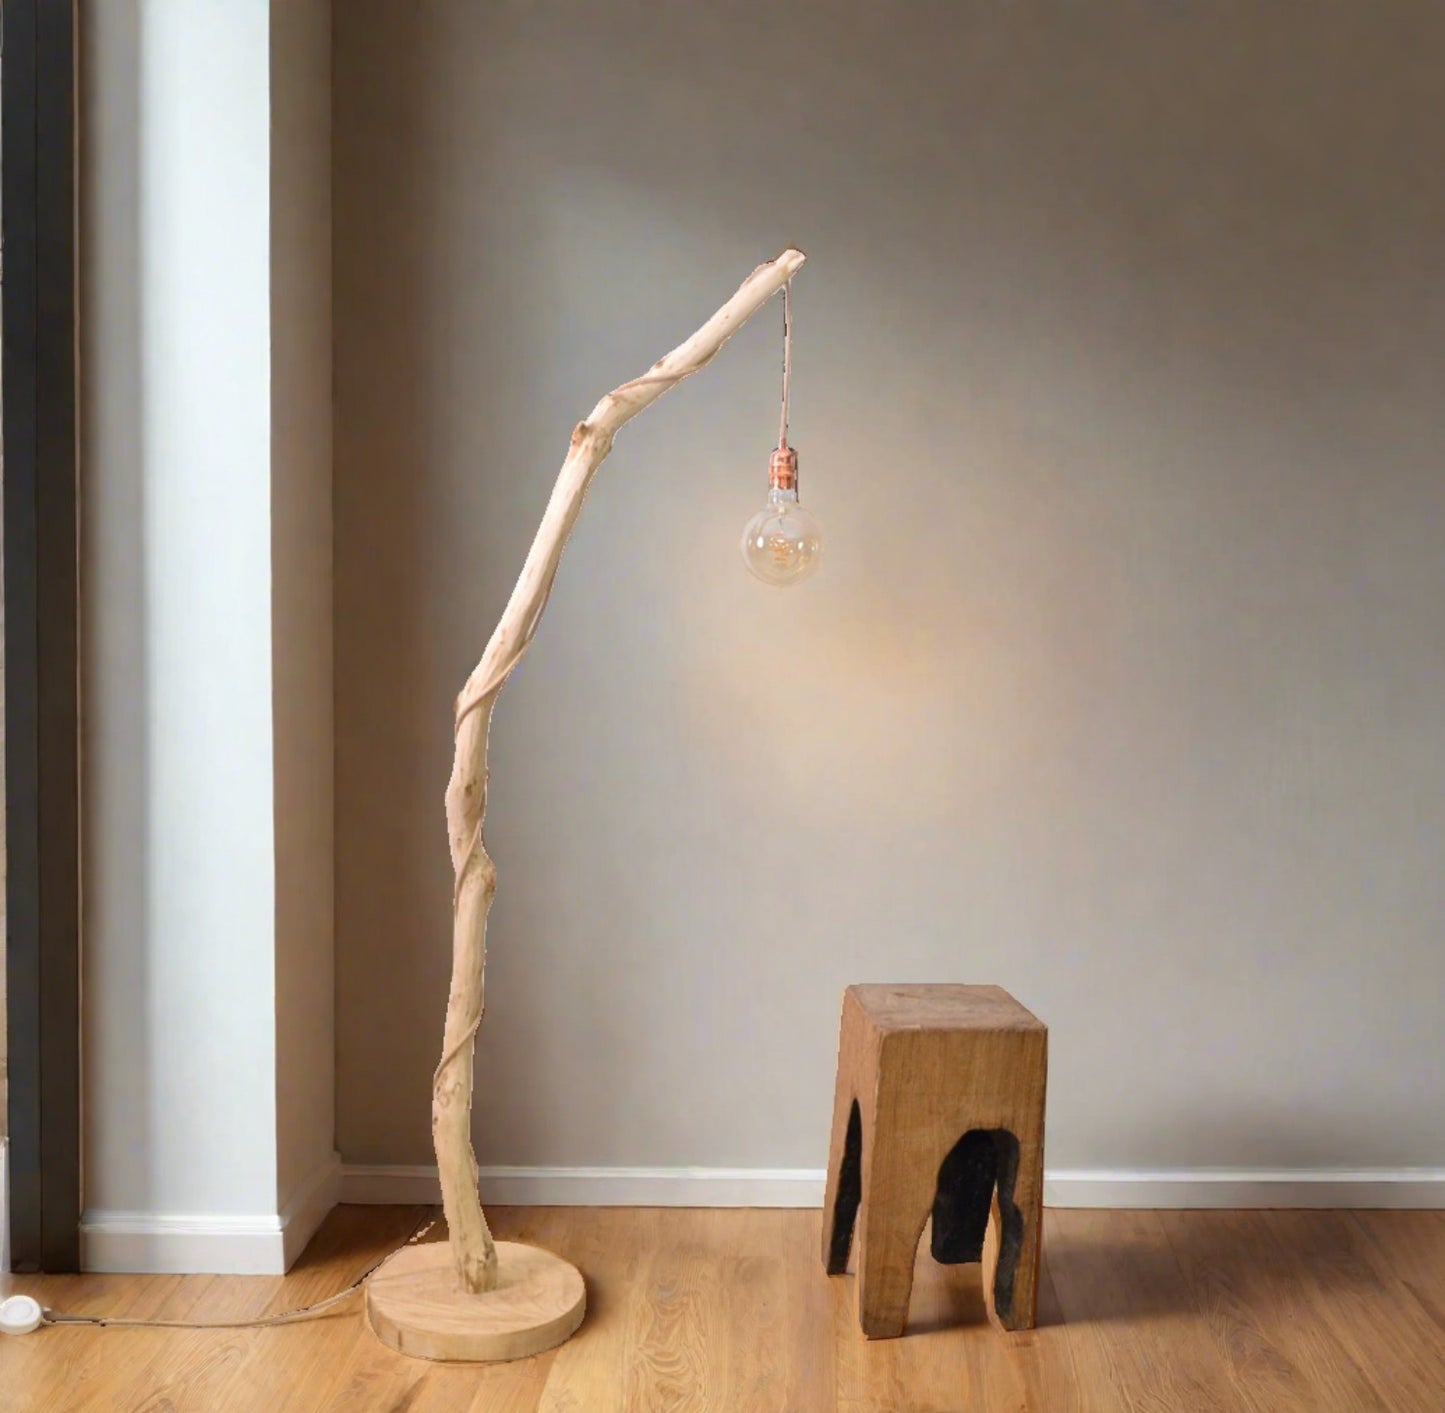 Branch floor lamp, with a nice oak branch